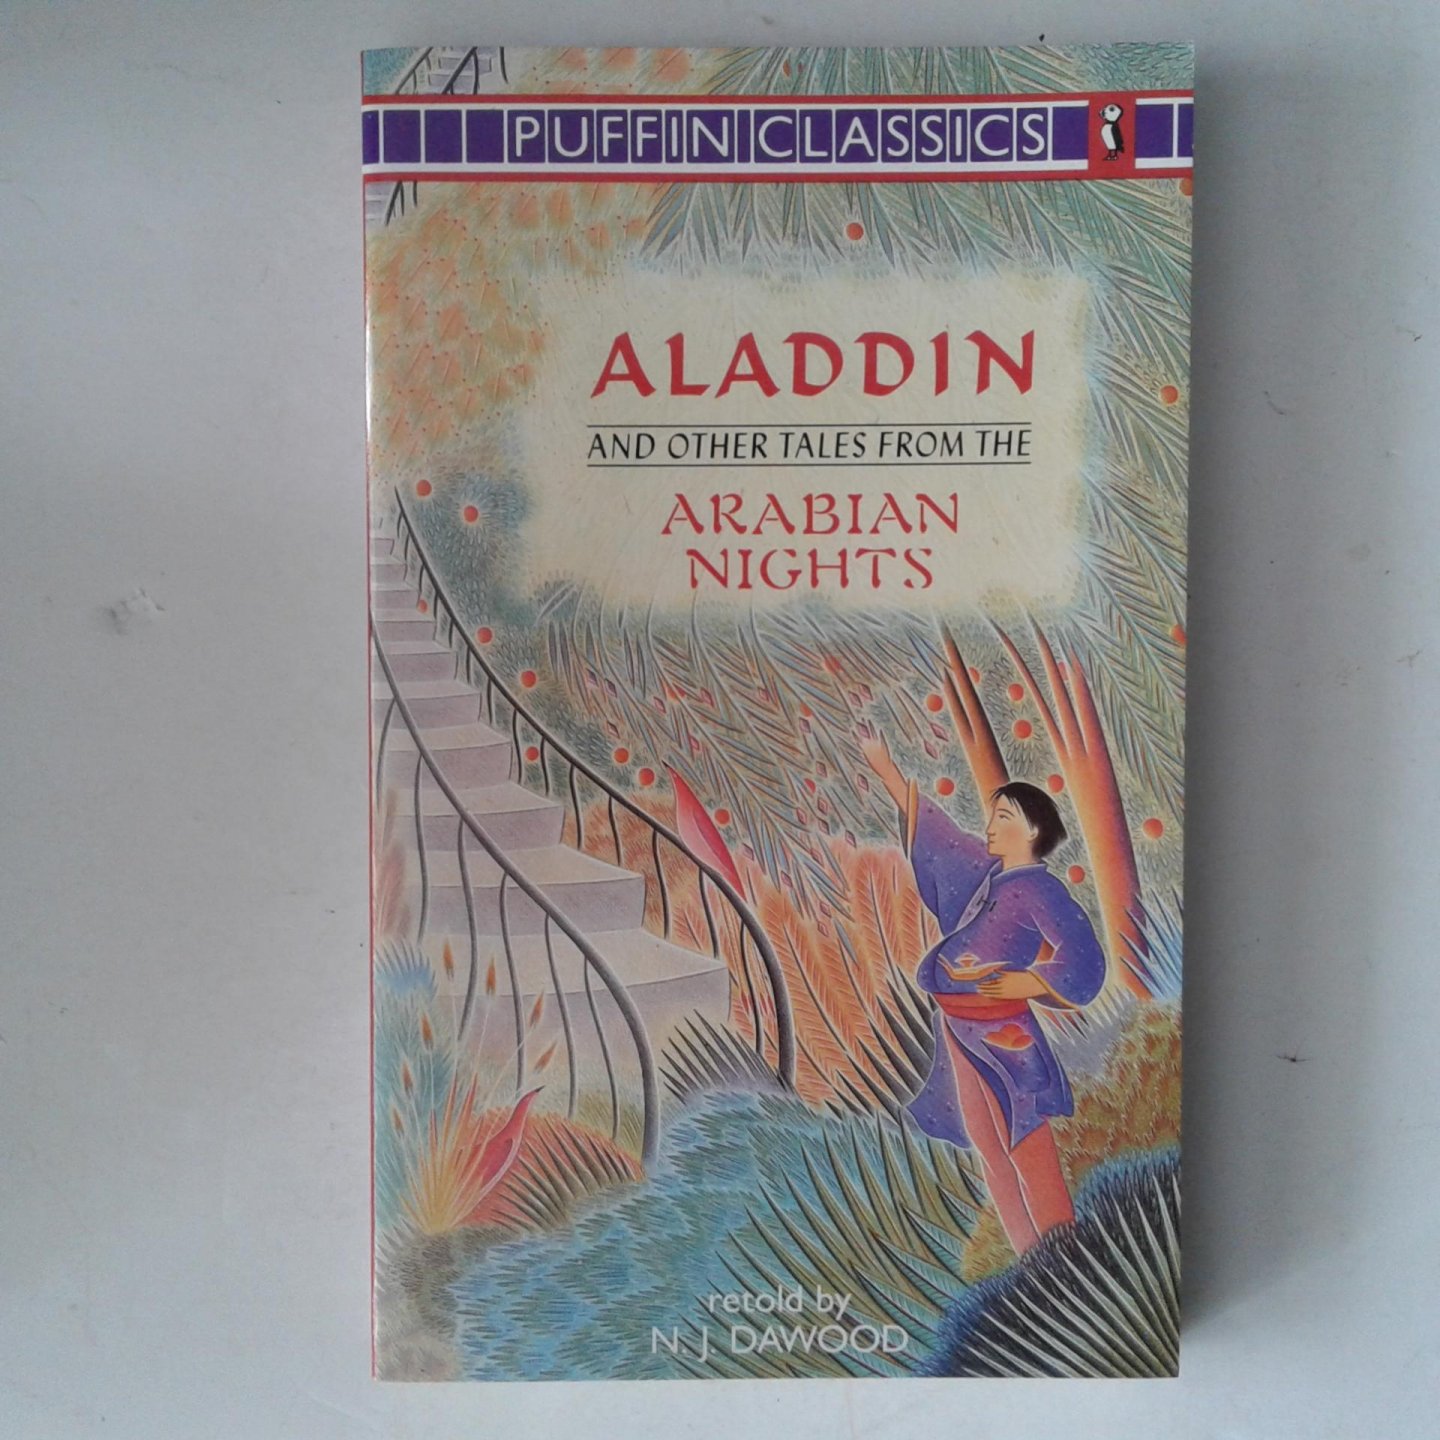 Dawood, N.J. (retold from the original Arabic) - Aladdin and other tales from the Arabian Nights